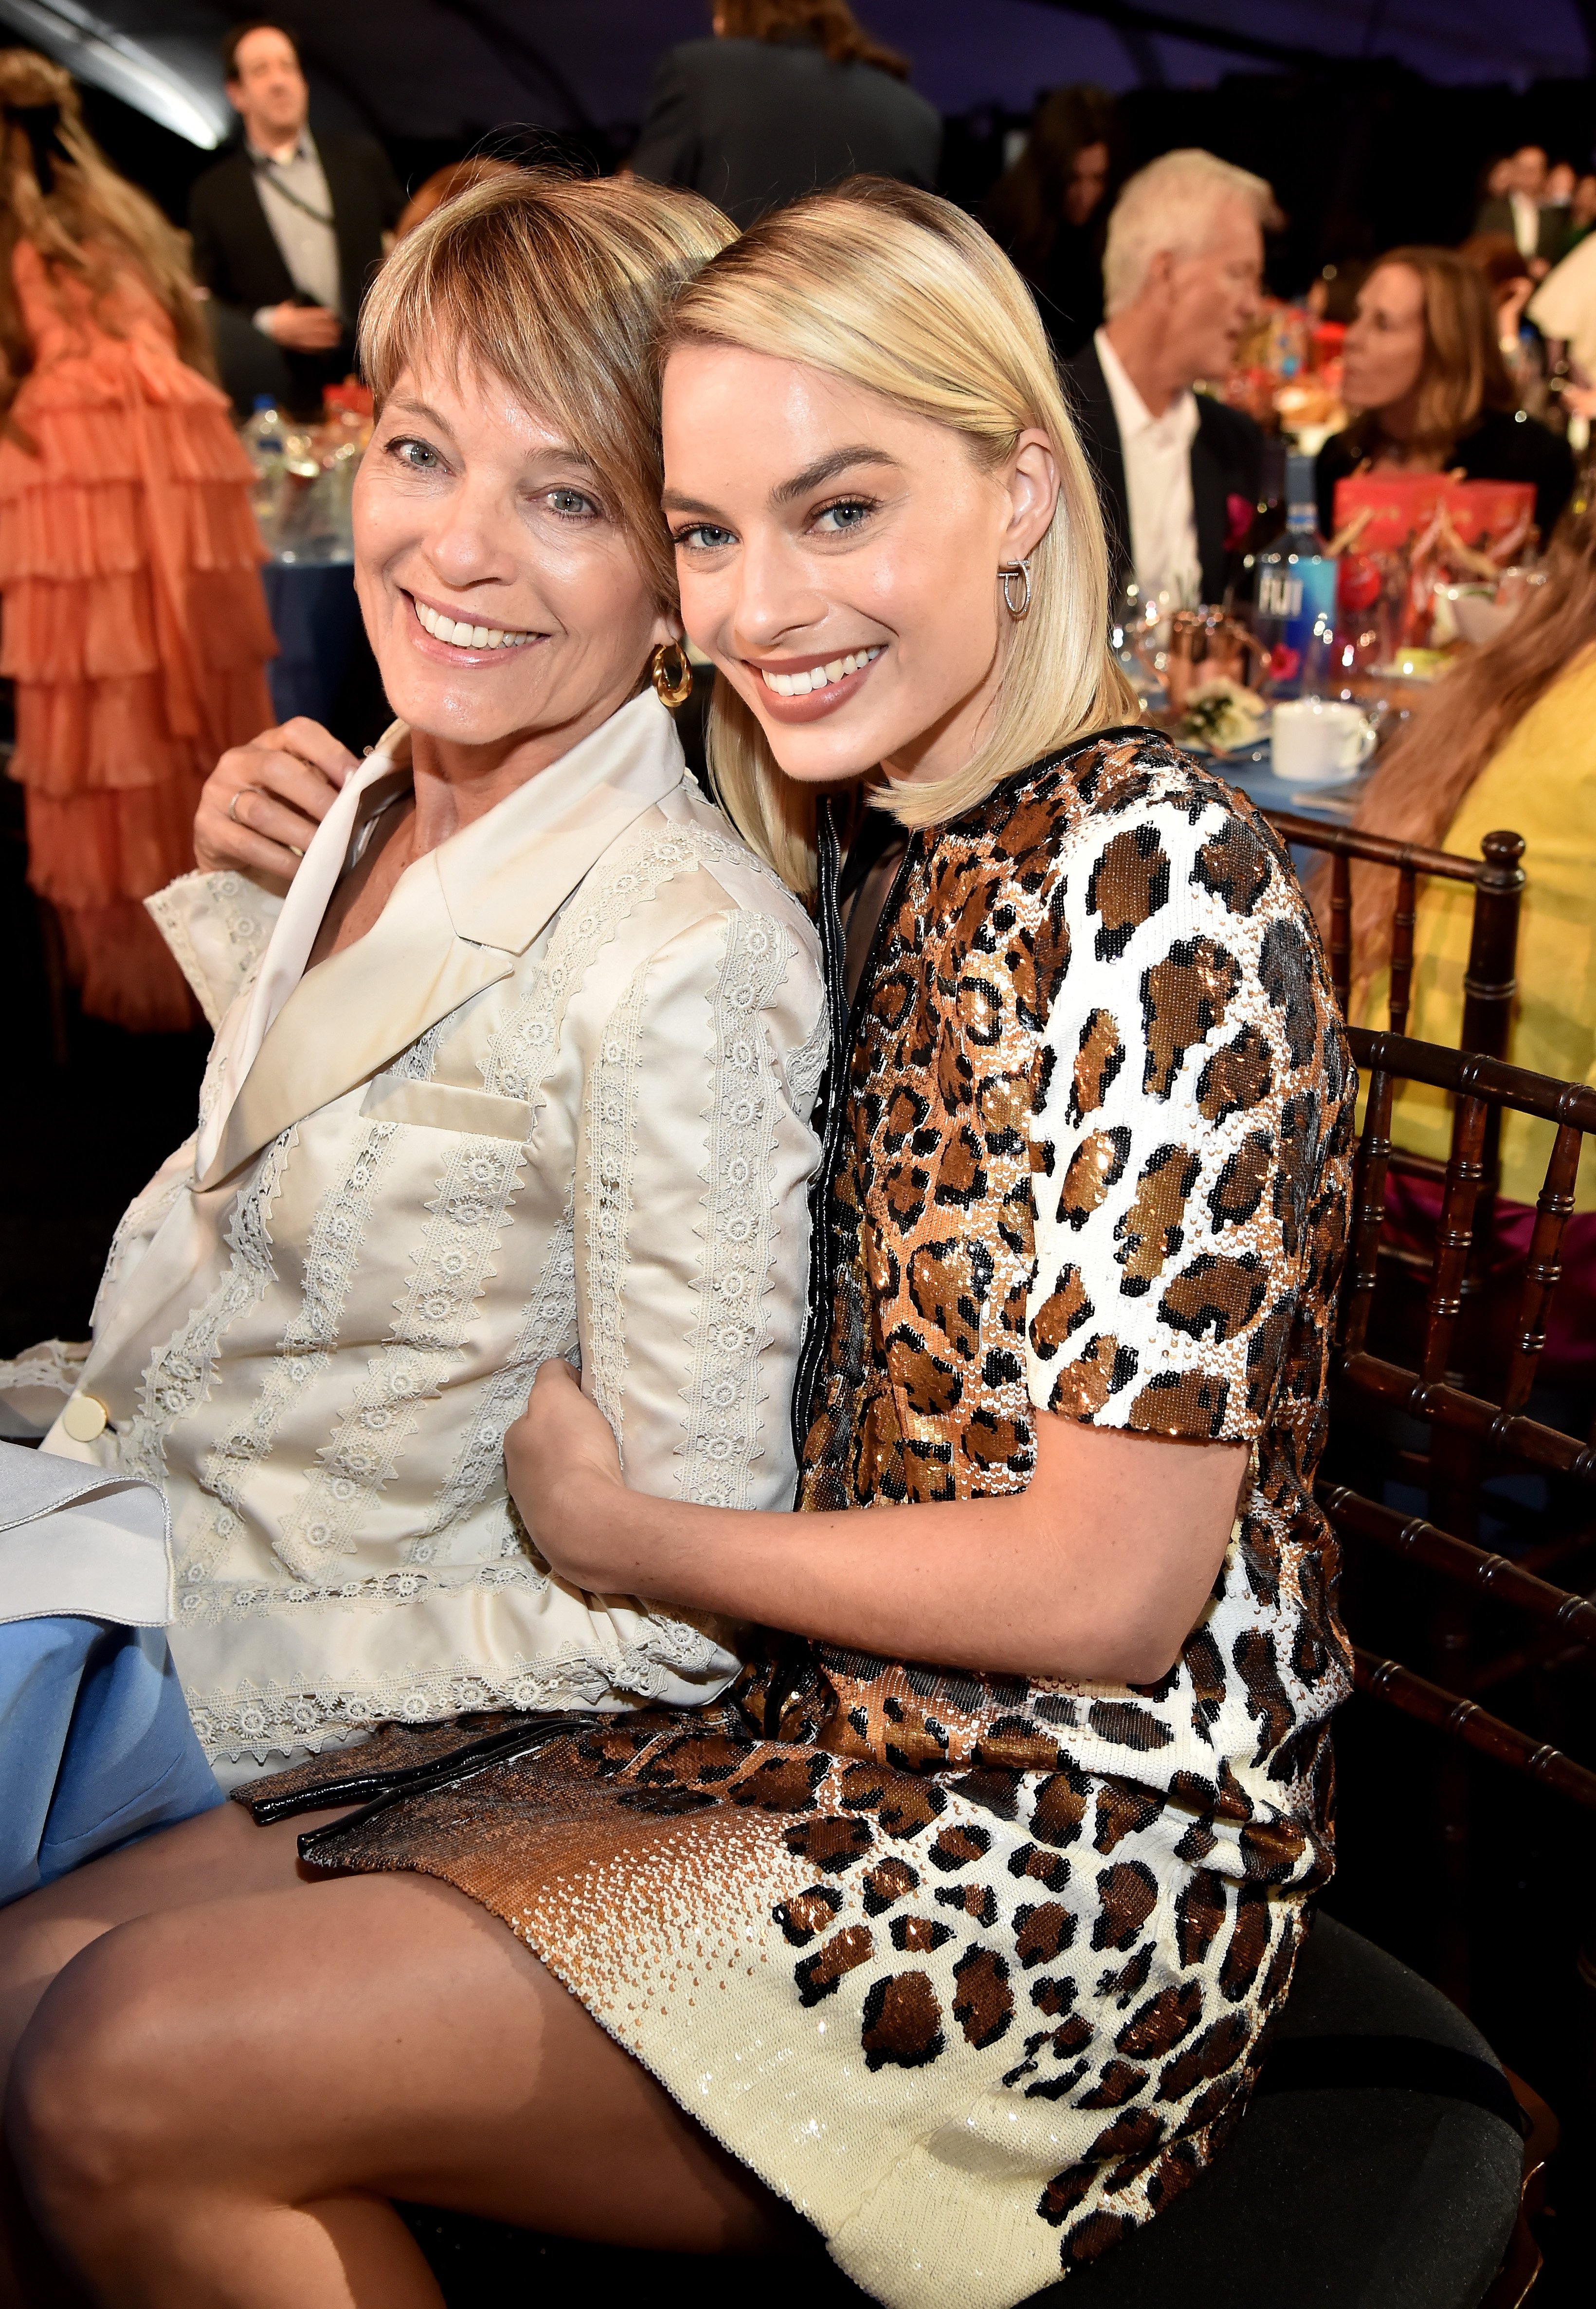 Sarie Kessler and her daughter Margot Robbie pose during the 2018 Film Independent Spirit Awards on March 3, 2018, in Santa Monica, California. | Source: Getty Images